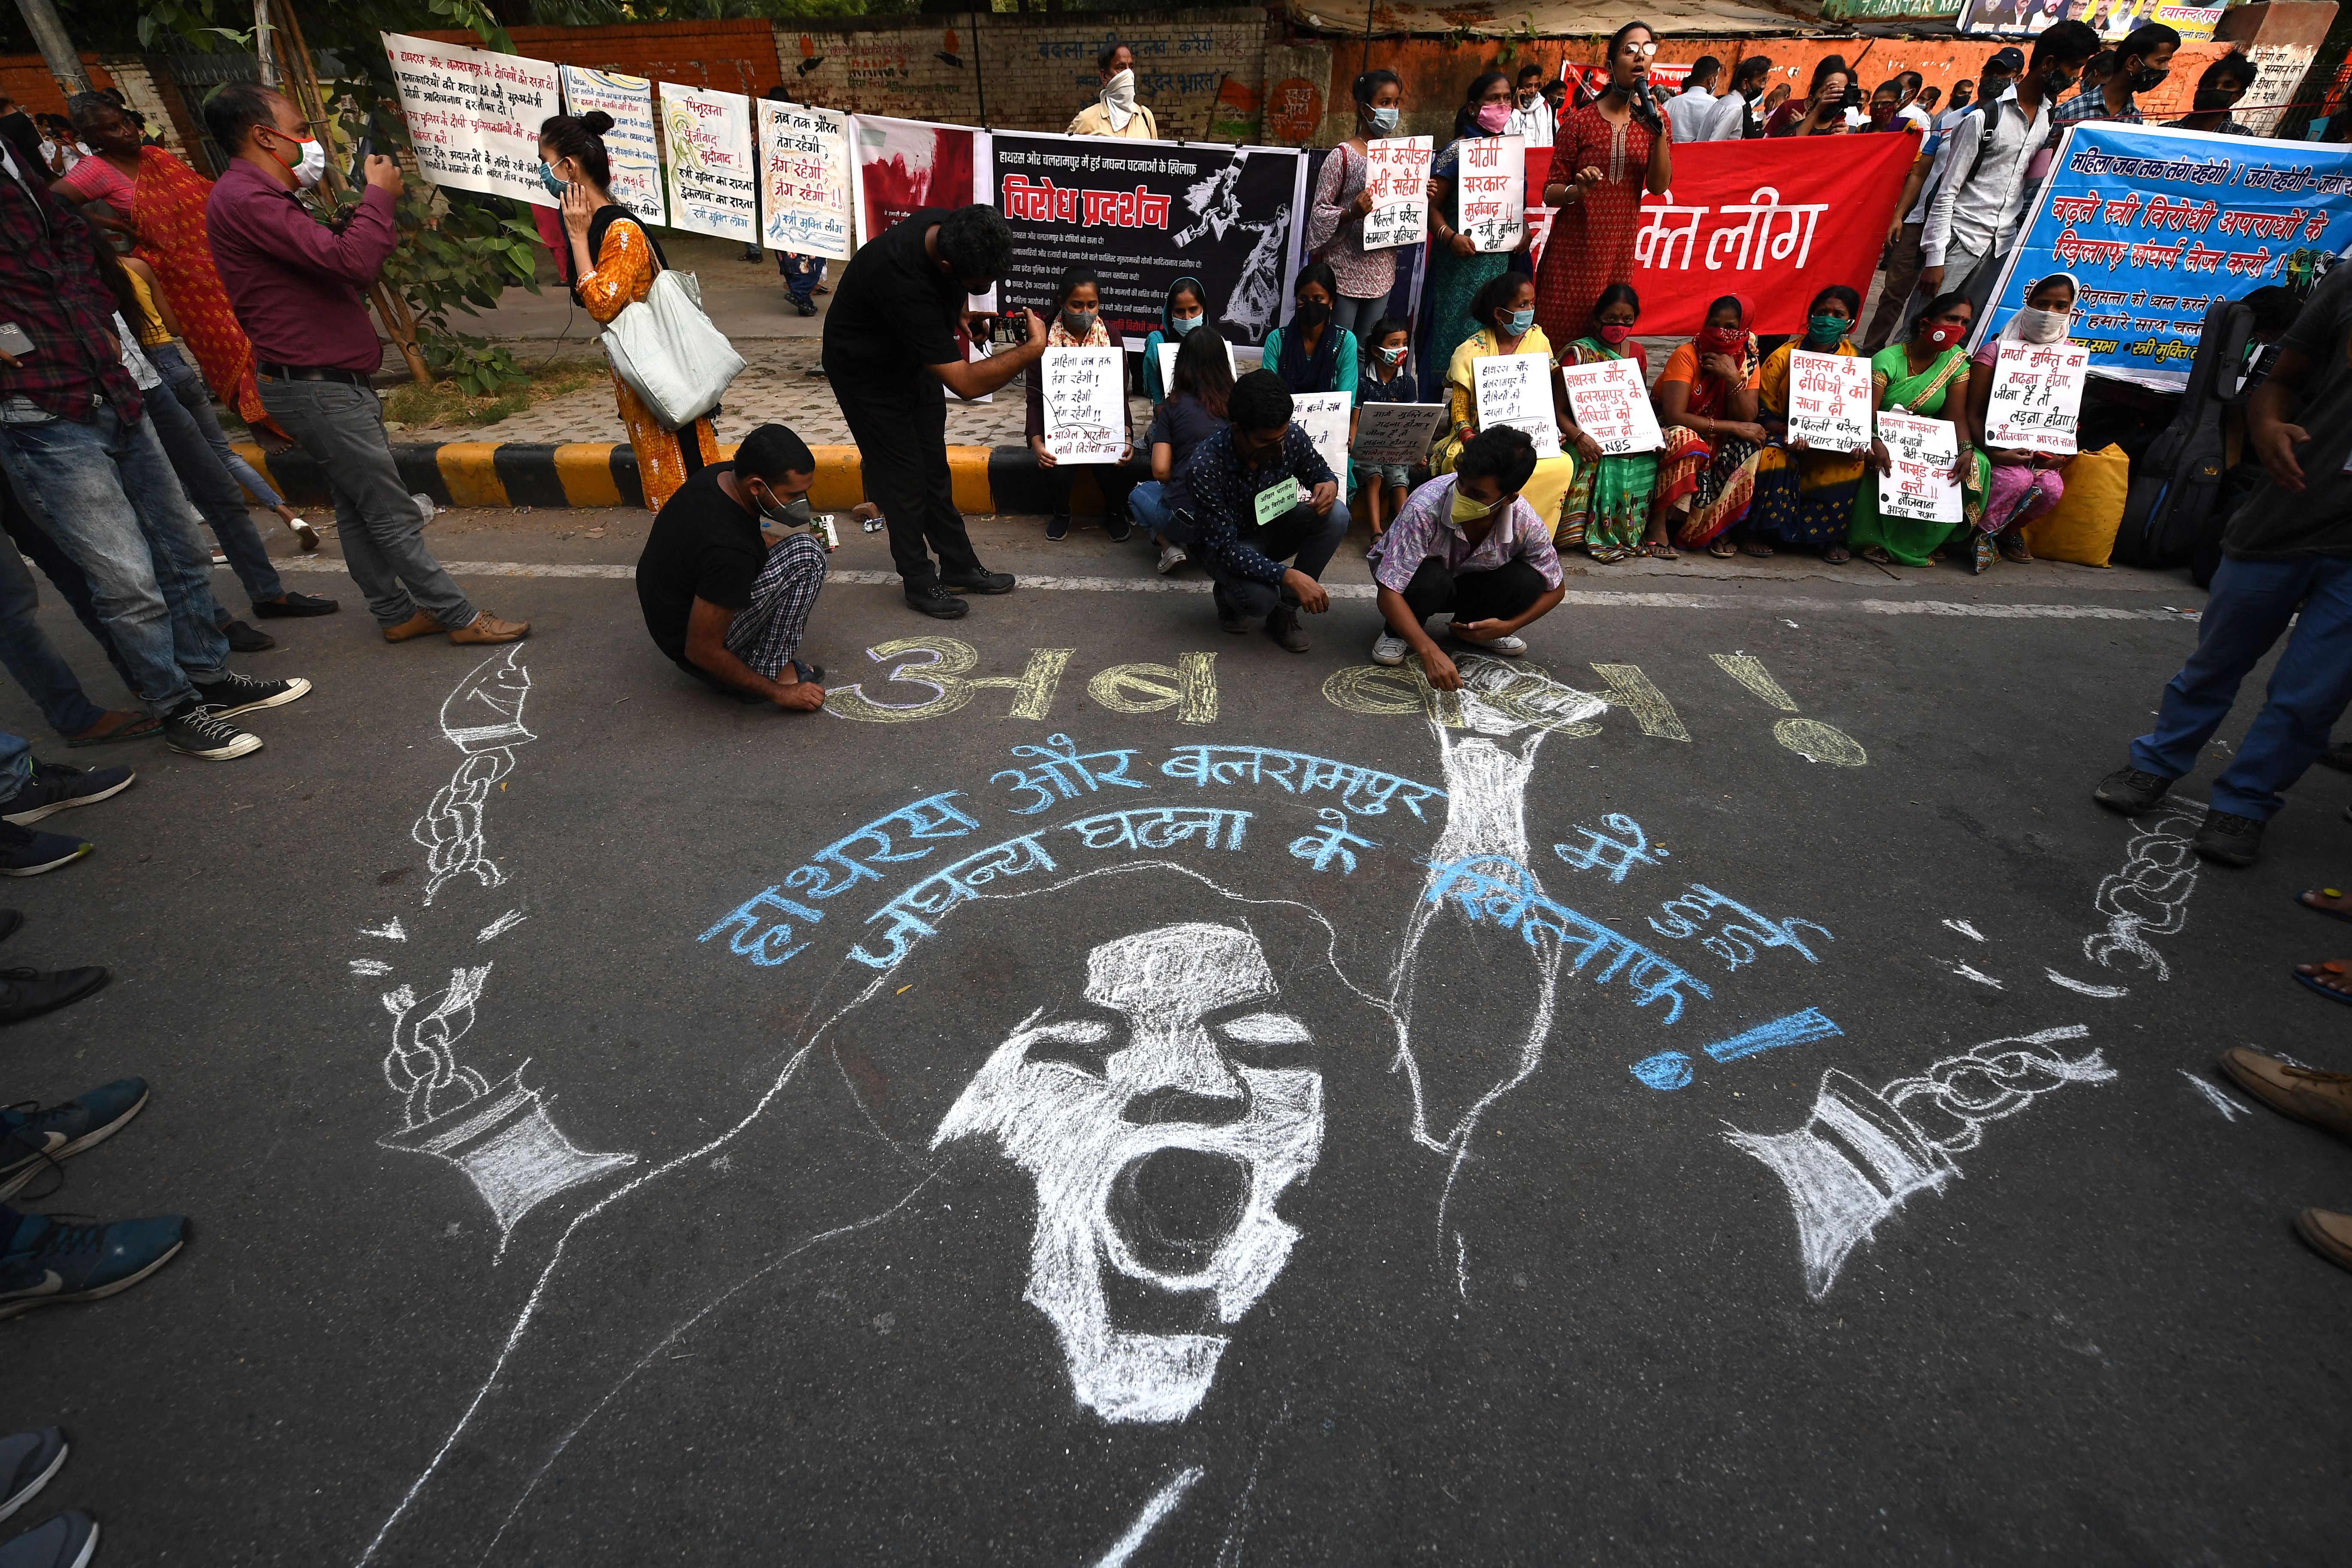 Demonstrators paint a floor mural to protest against rape in India